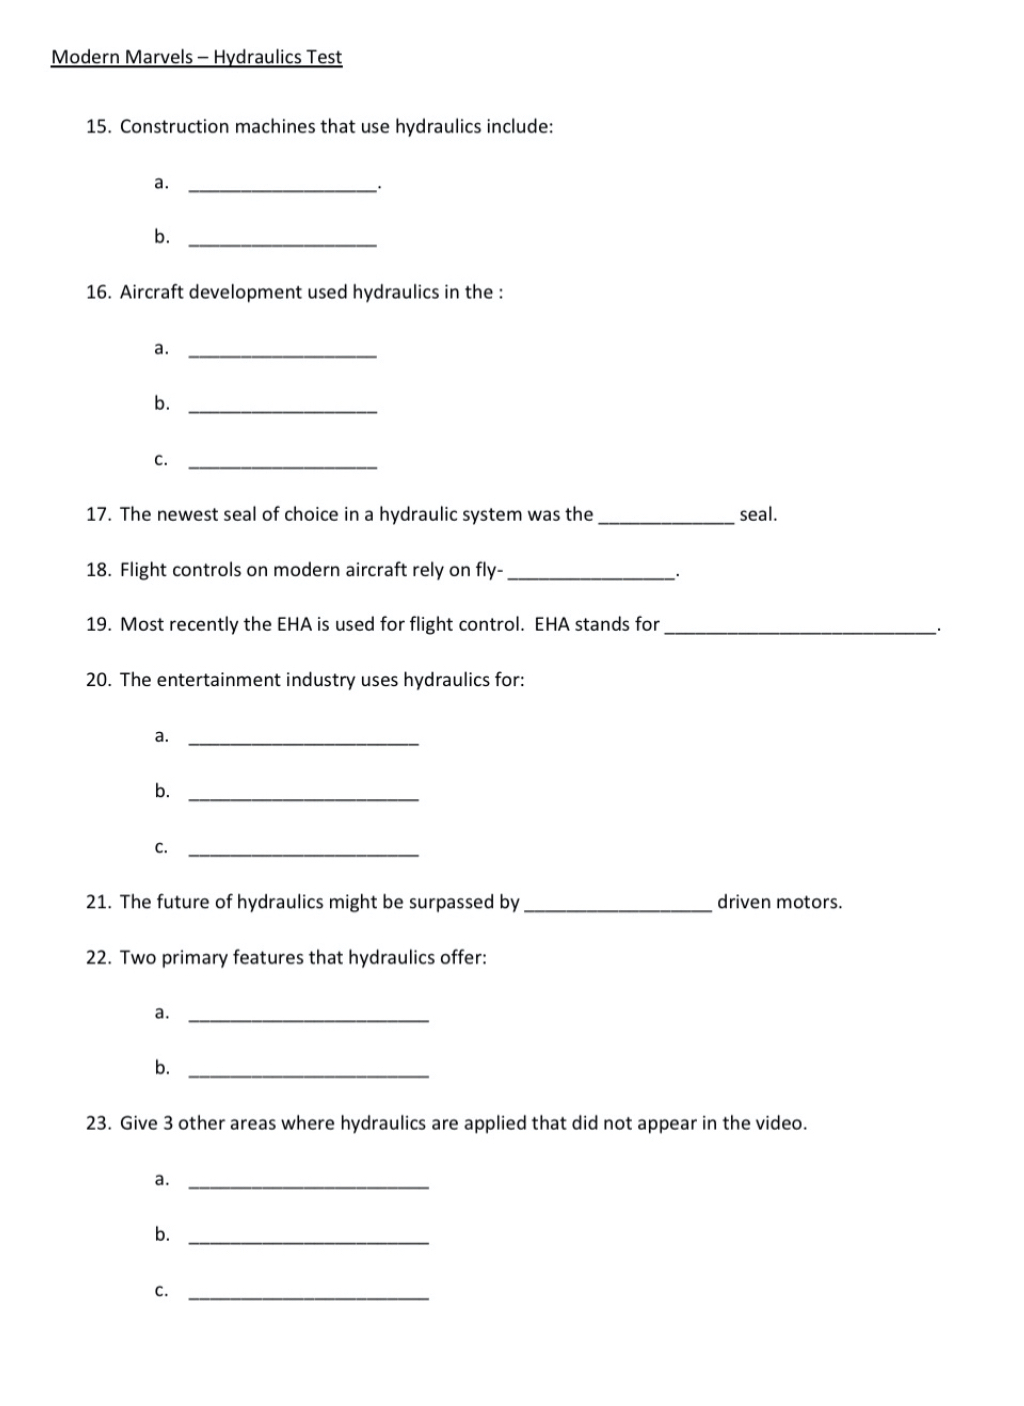 modern-marvels-cotton-worksheet-answers-free-download-qstion-co